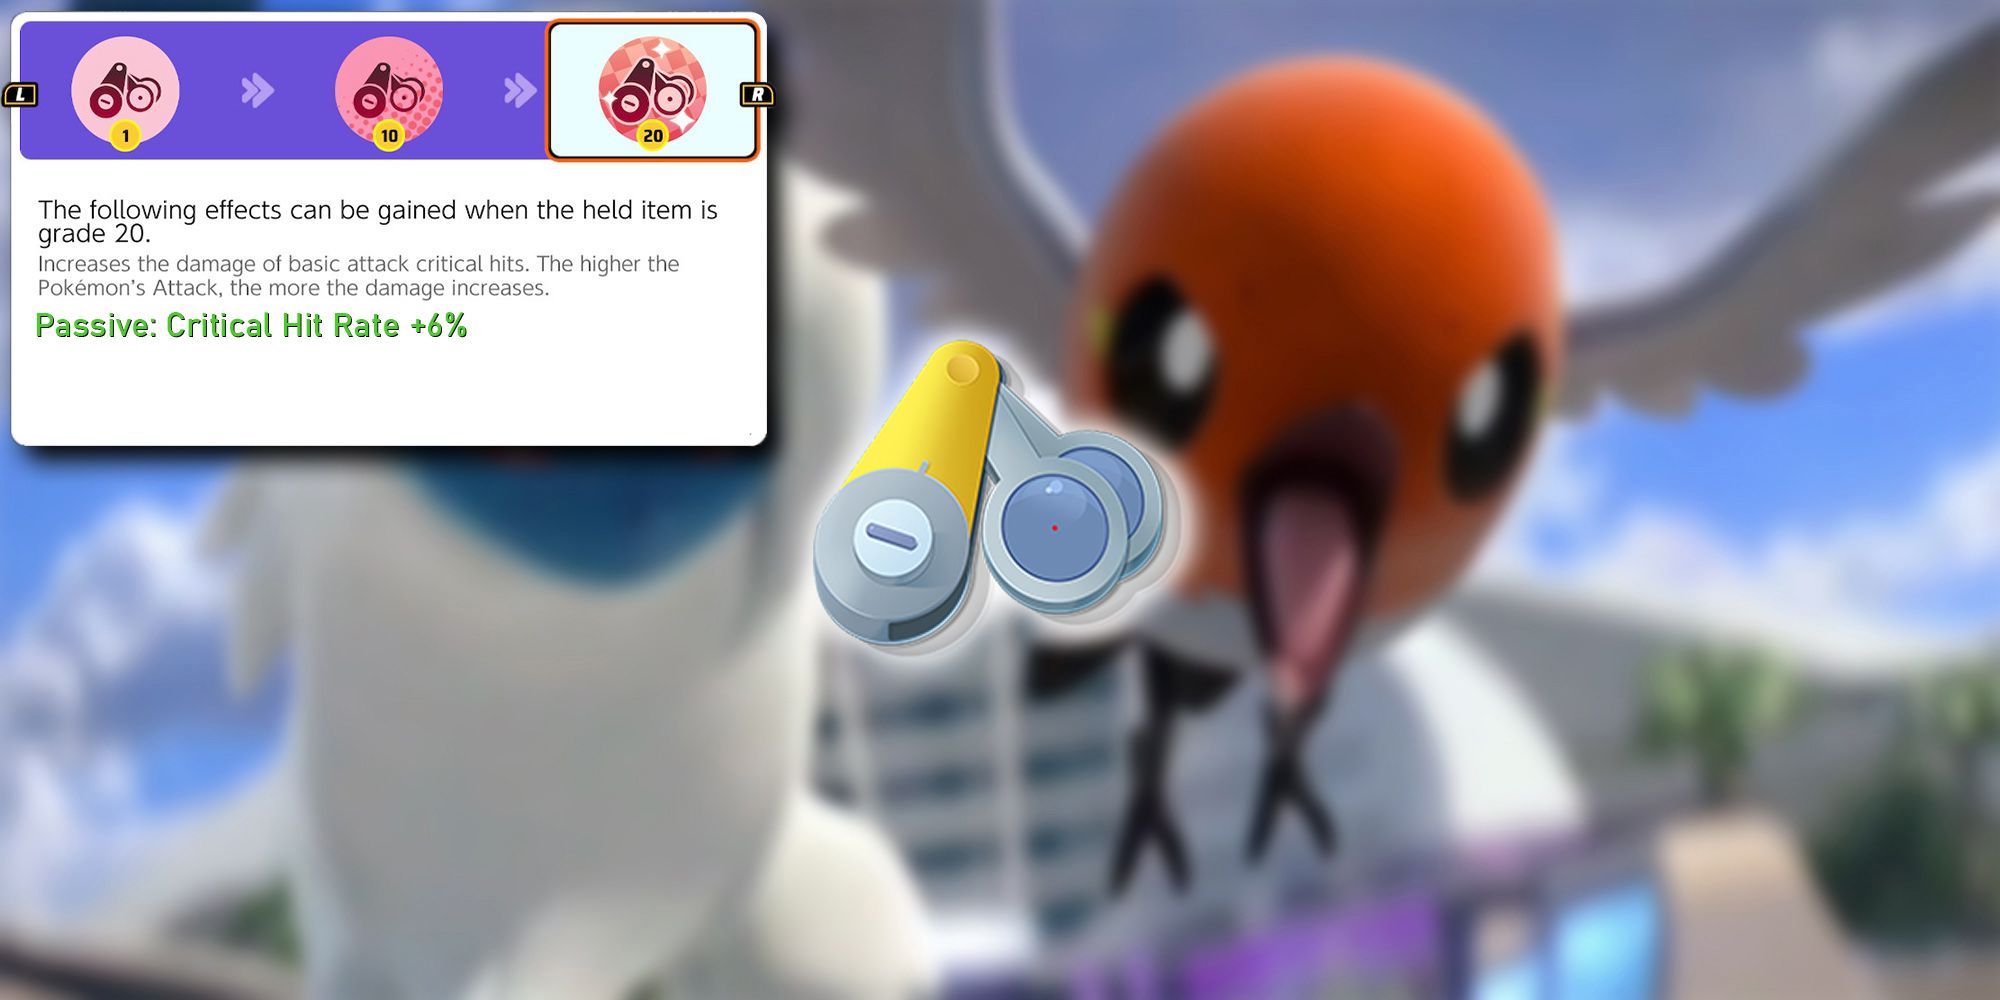 Pokemon-Unite-Scope-Lens-Held-Item-PNG-Overlaid-On-Image-Of-Absol-Chasing-Down-A-Fletchling-In-One-Of-The-Trailers